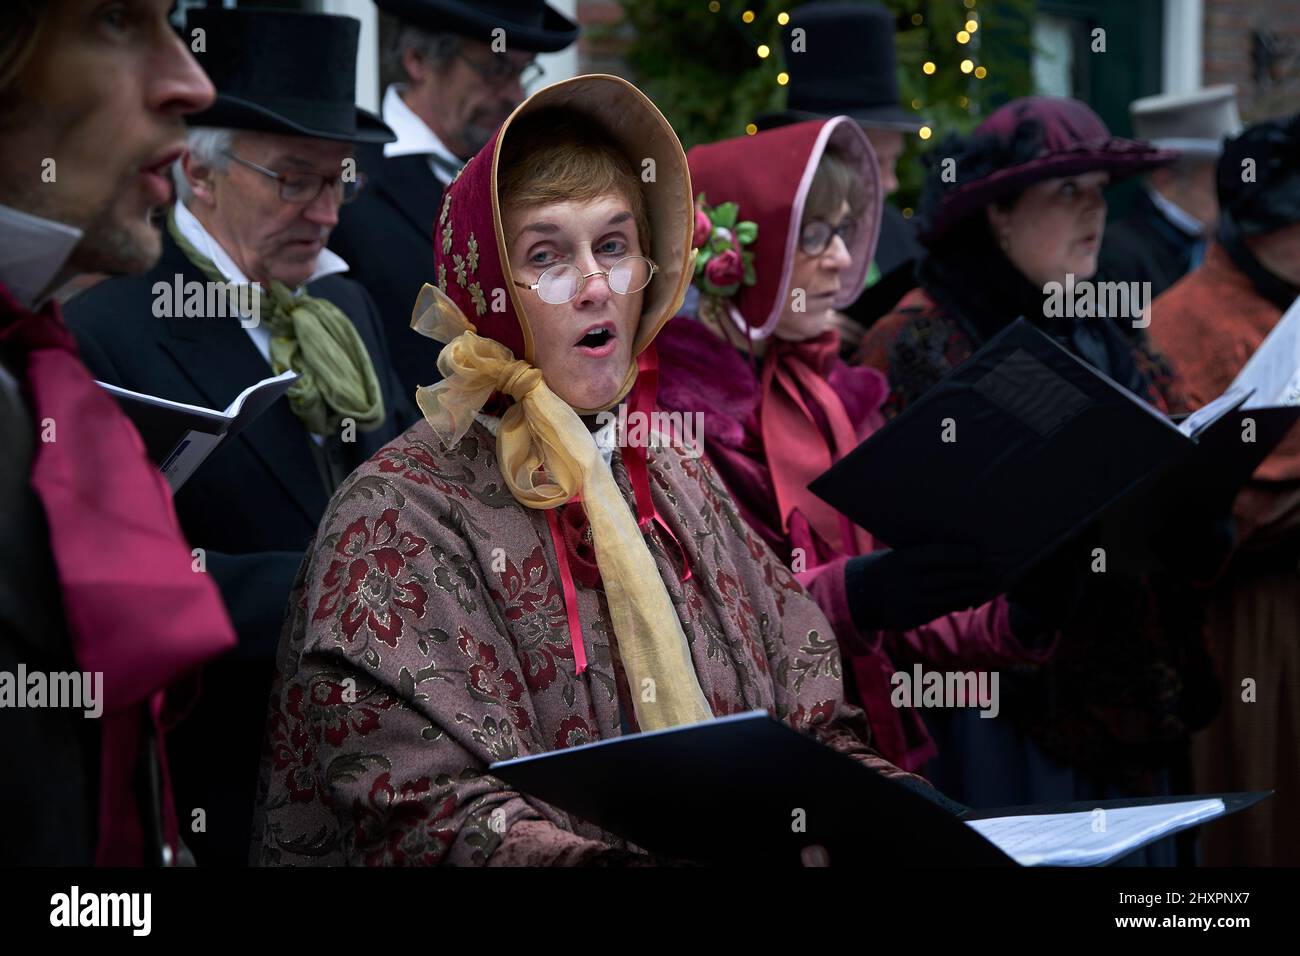 A choir sings Christmas songs in front of the audience Stock Photo